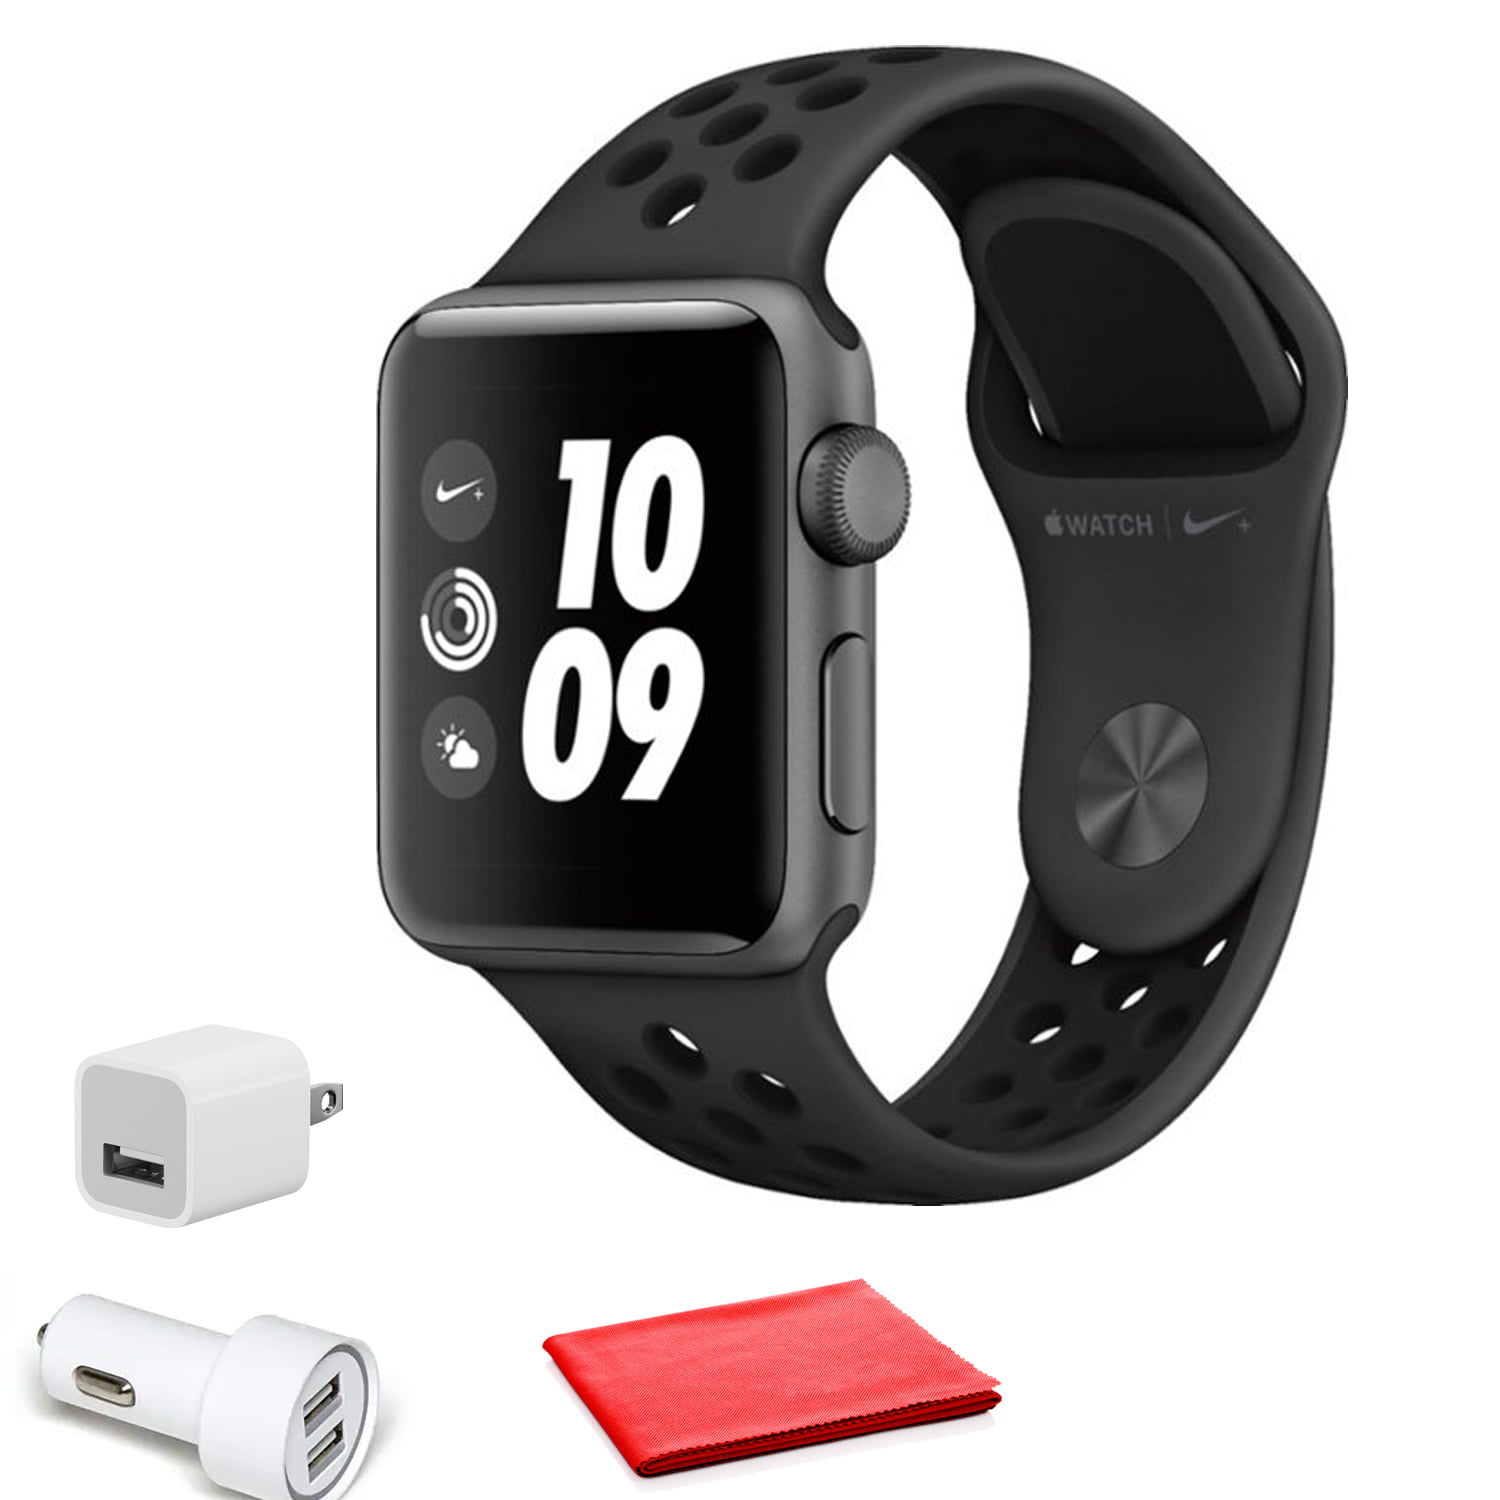 Apple Watch Nike+ Series 3 GPS, 38mm Space Gray + Black Band with USB  Adapter (New-Open Box)